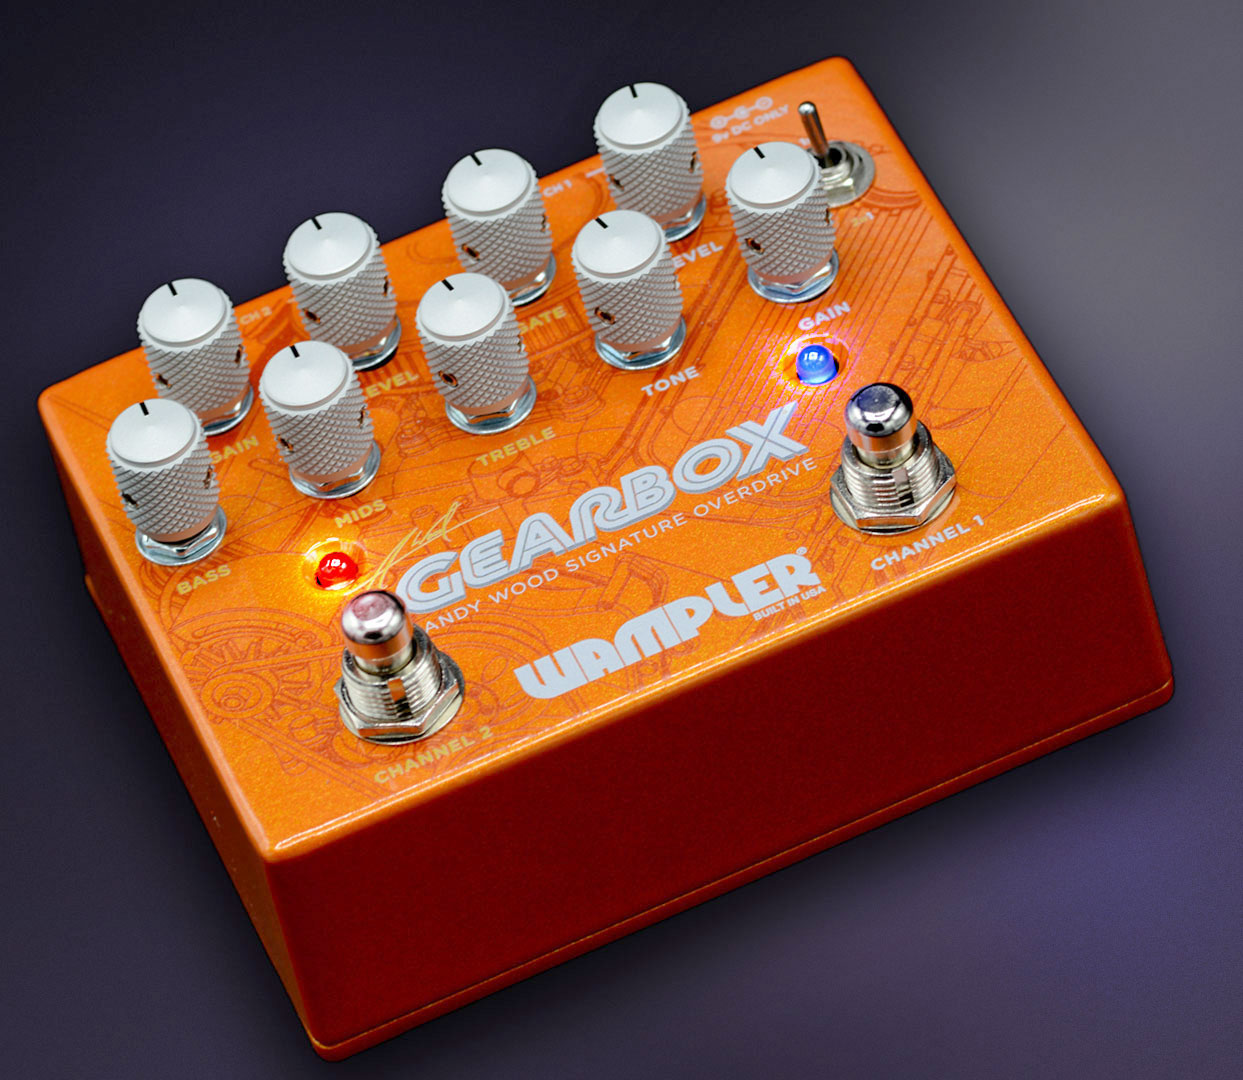 Andy Wood: Gearbox - Wampler Pedals